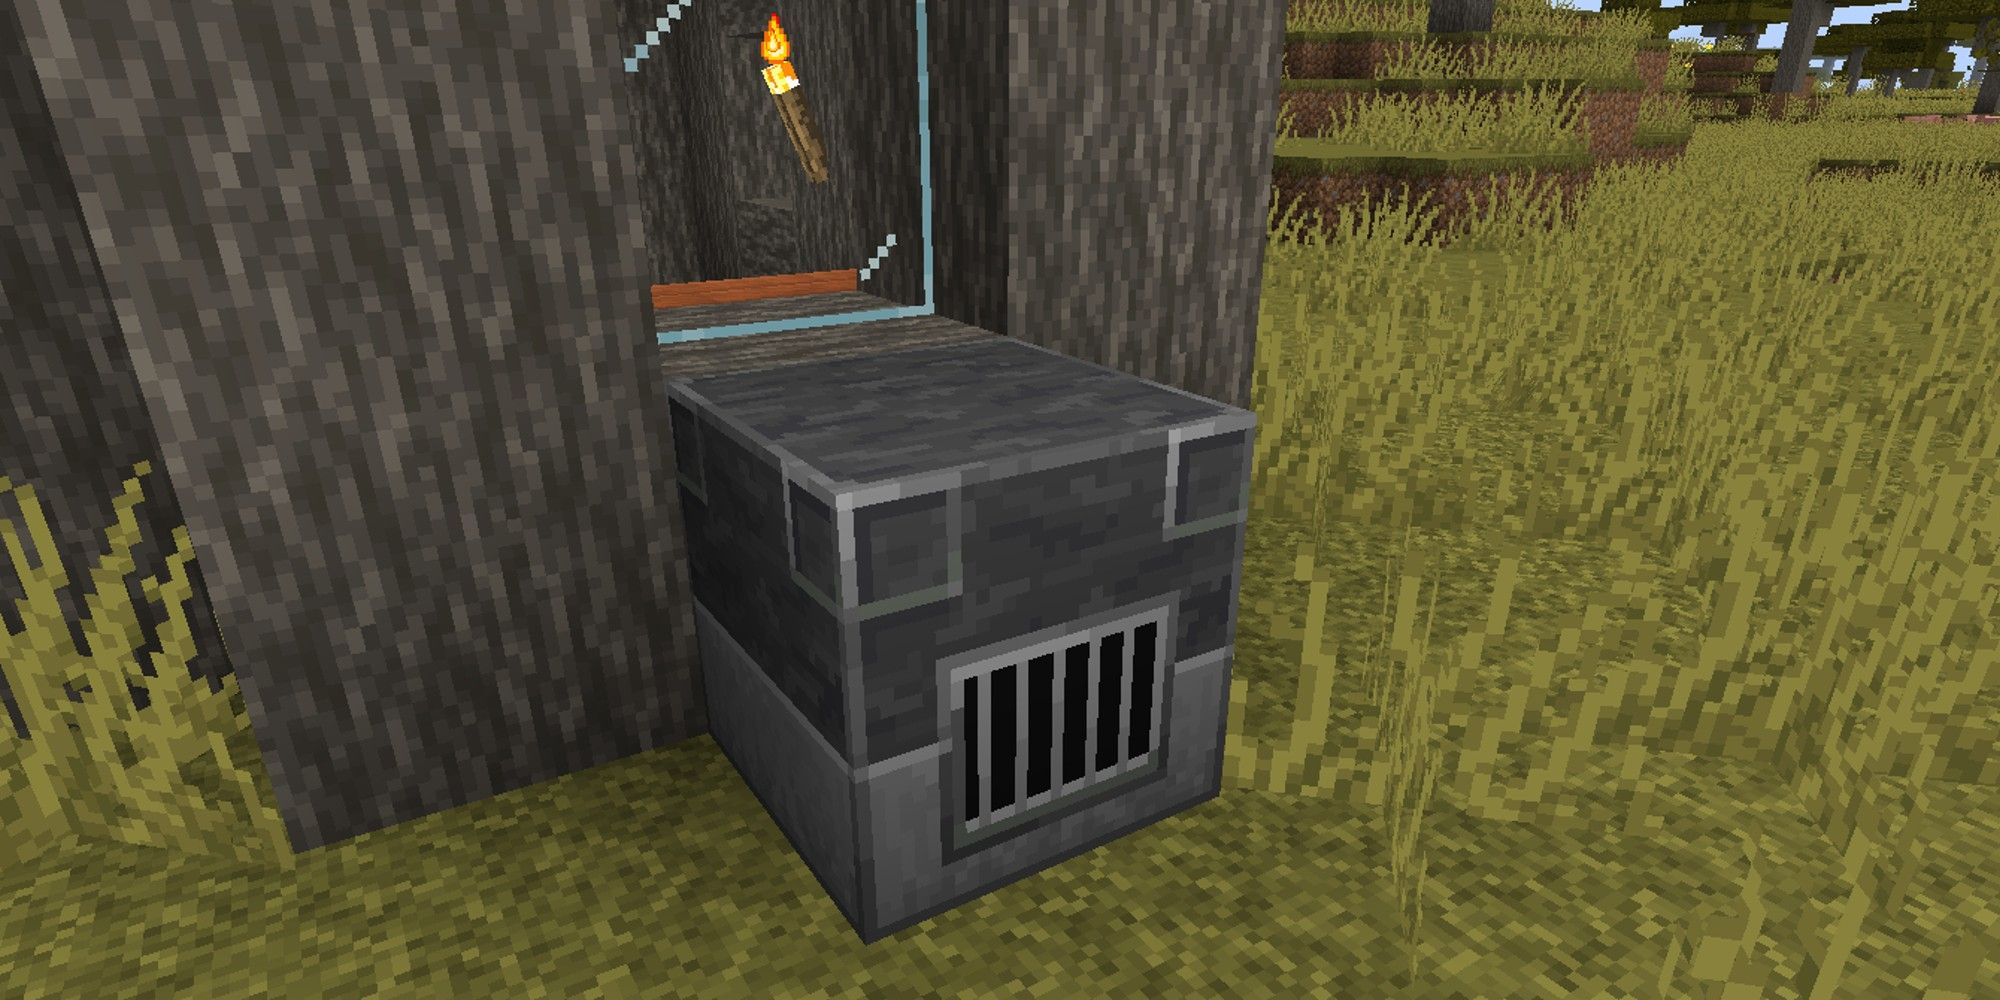 blast furnace placed next to villager house outside